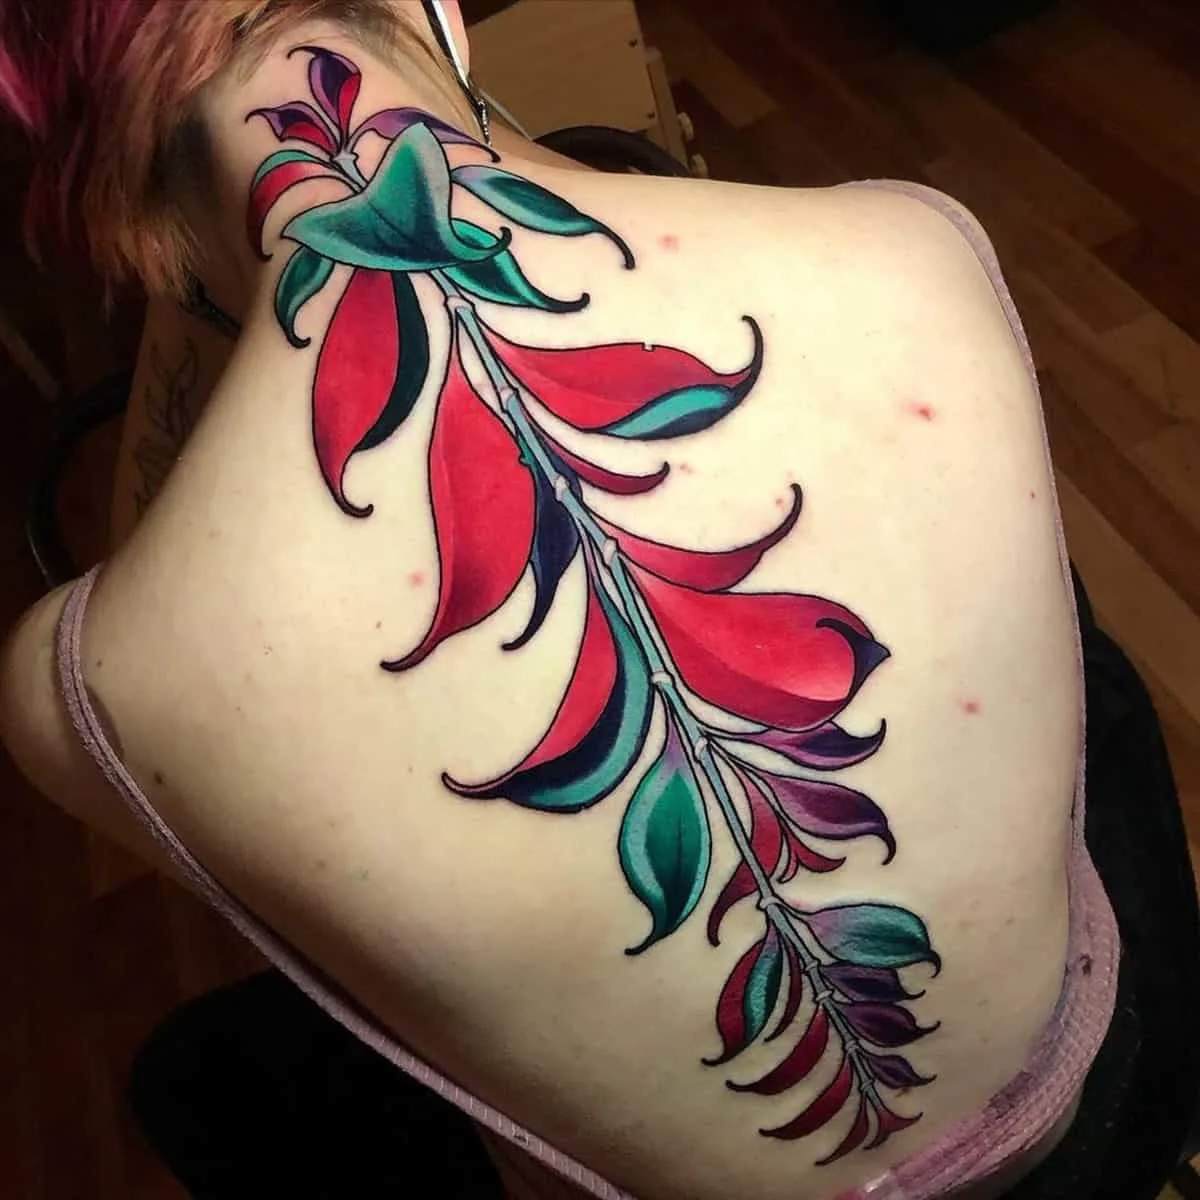  Floral green and red spine tattoo